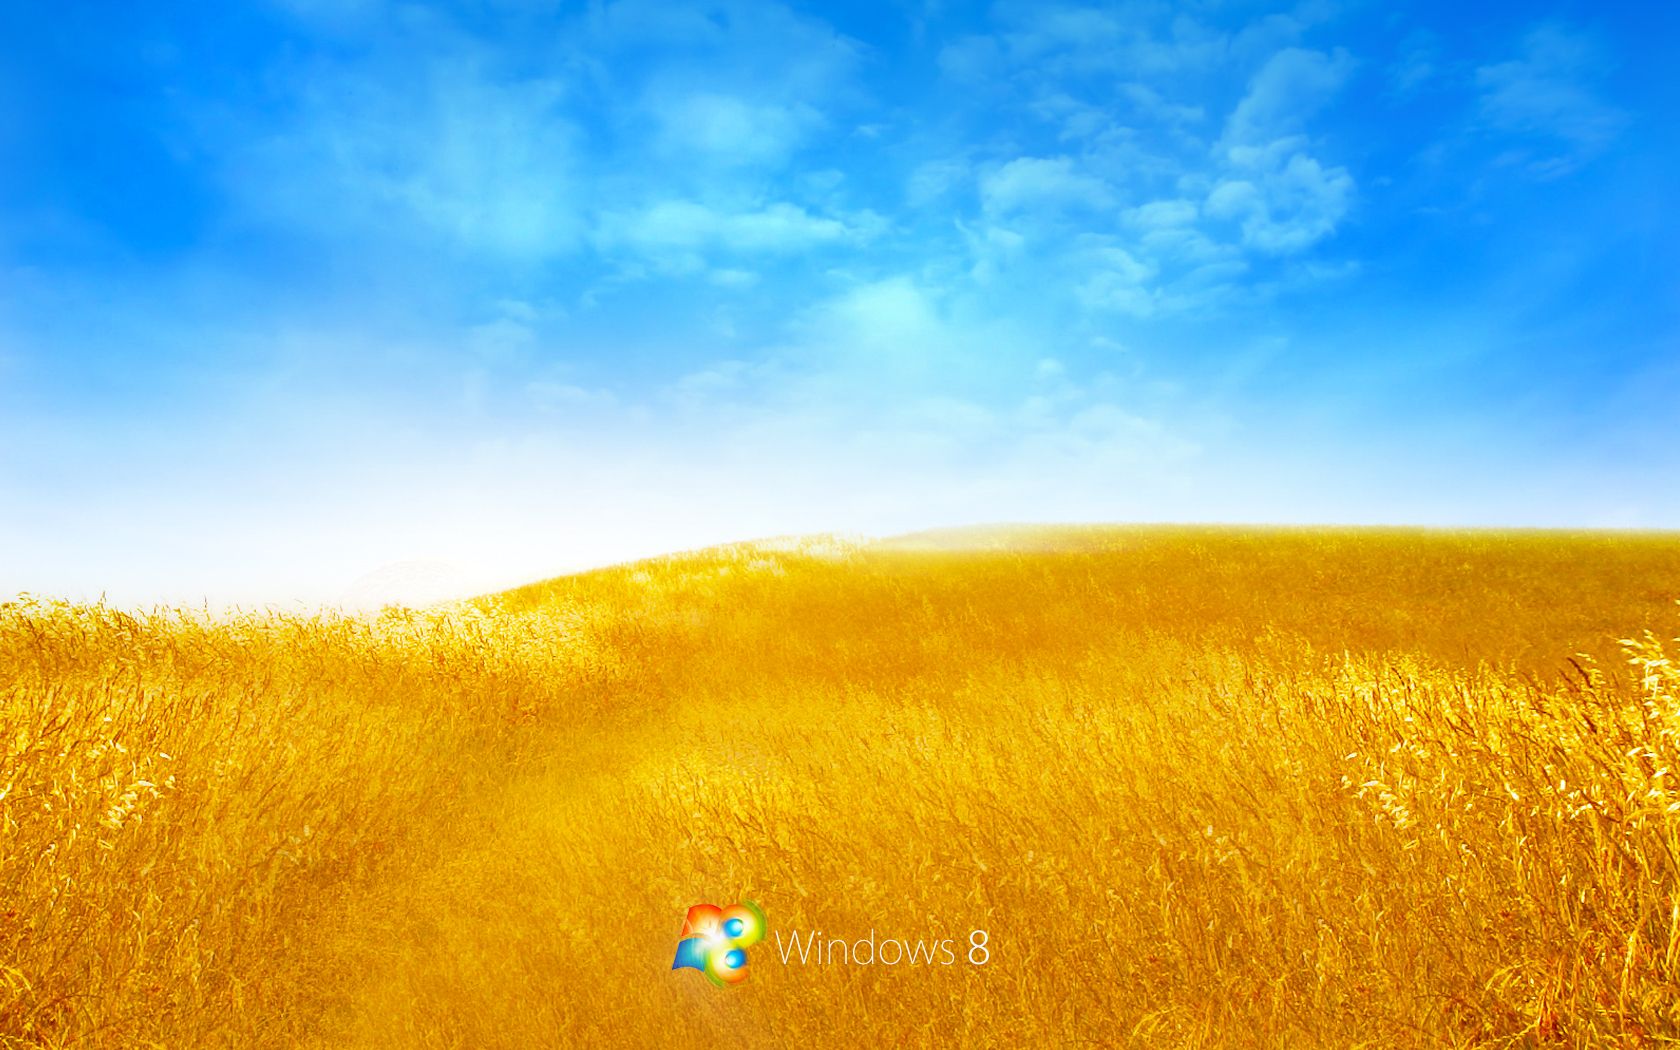 30 Top Collection Of Windows 8 Wallpaper